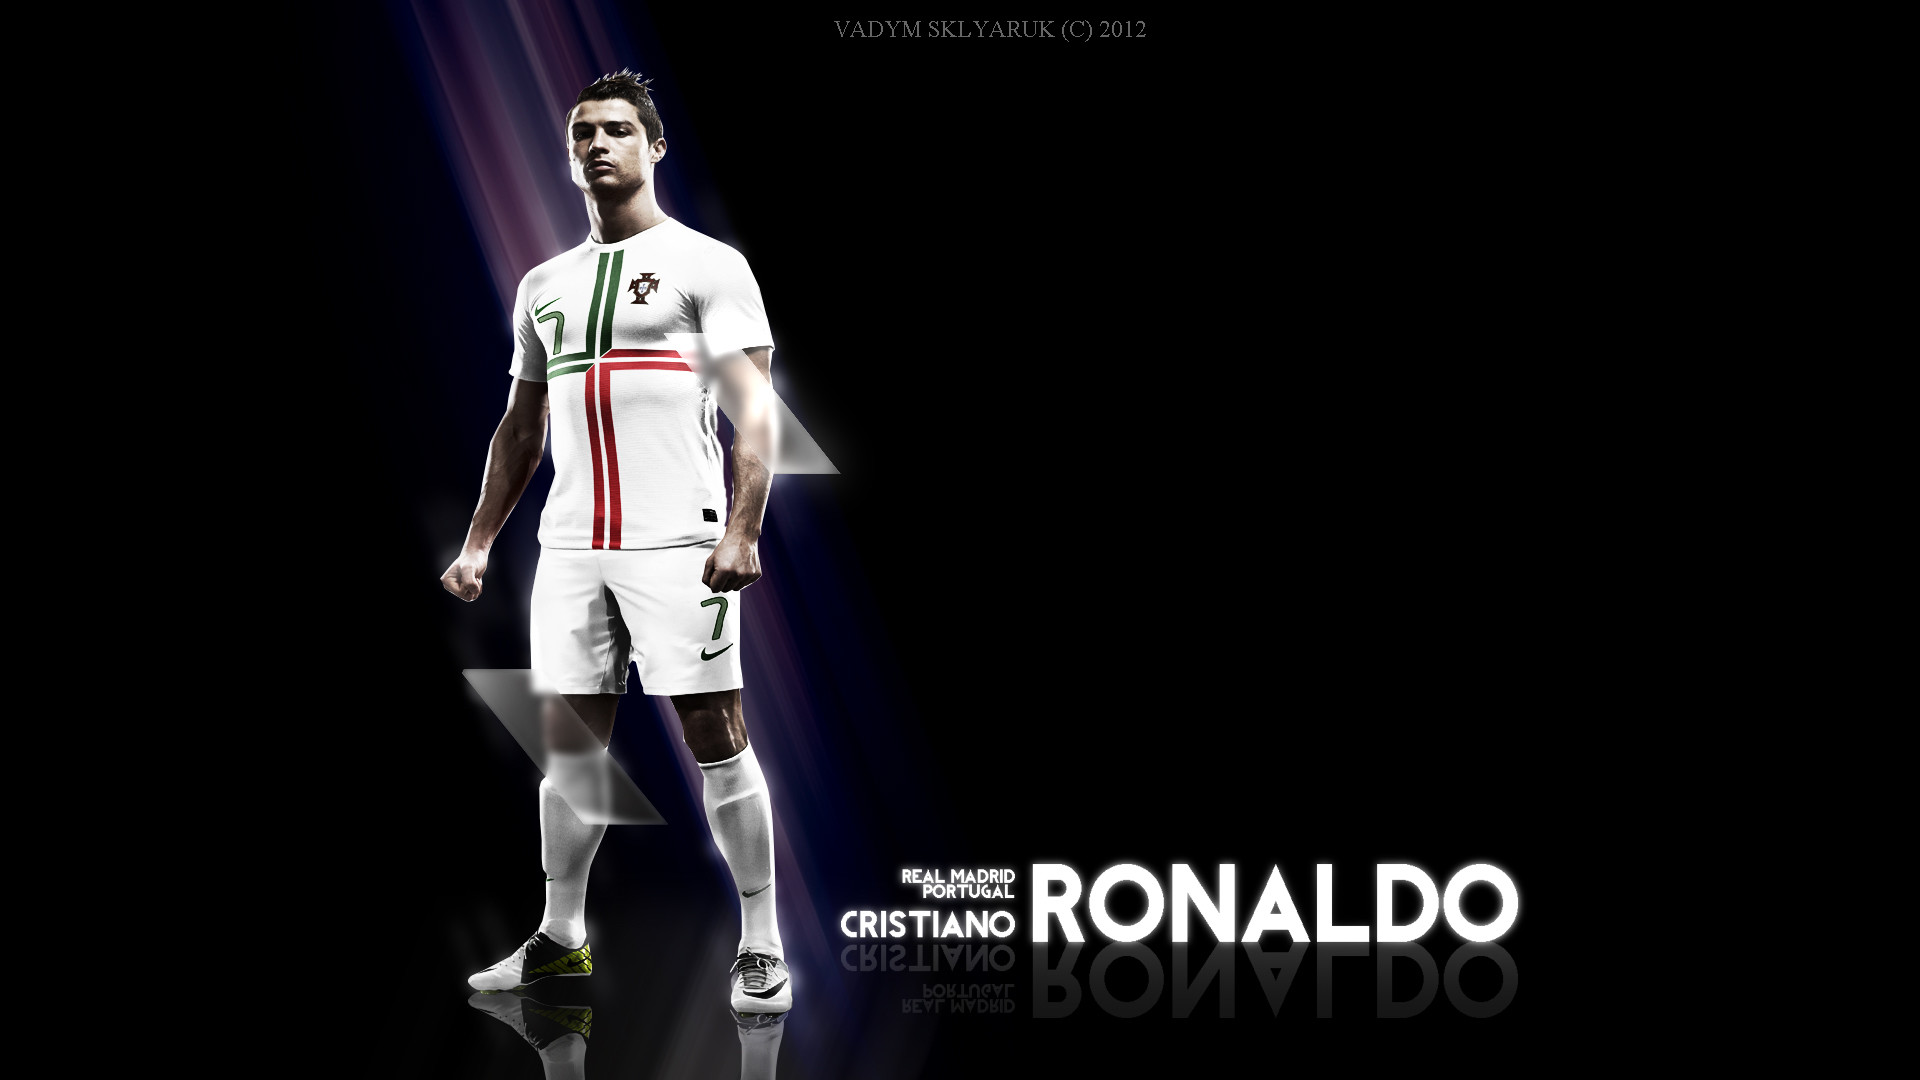 1920x1080 Cristiano Ronaldo, Cr7, Football Player, Real Madrid, Jersey, King, Stands